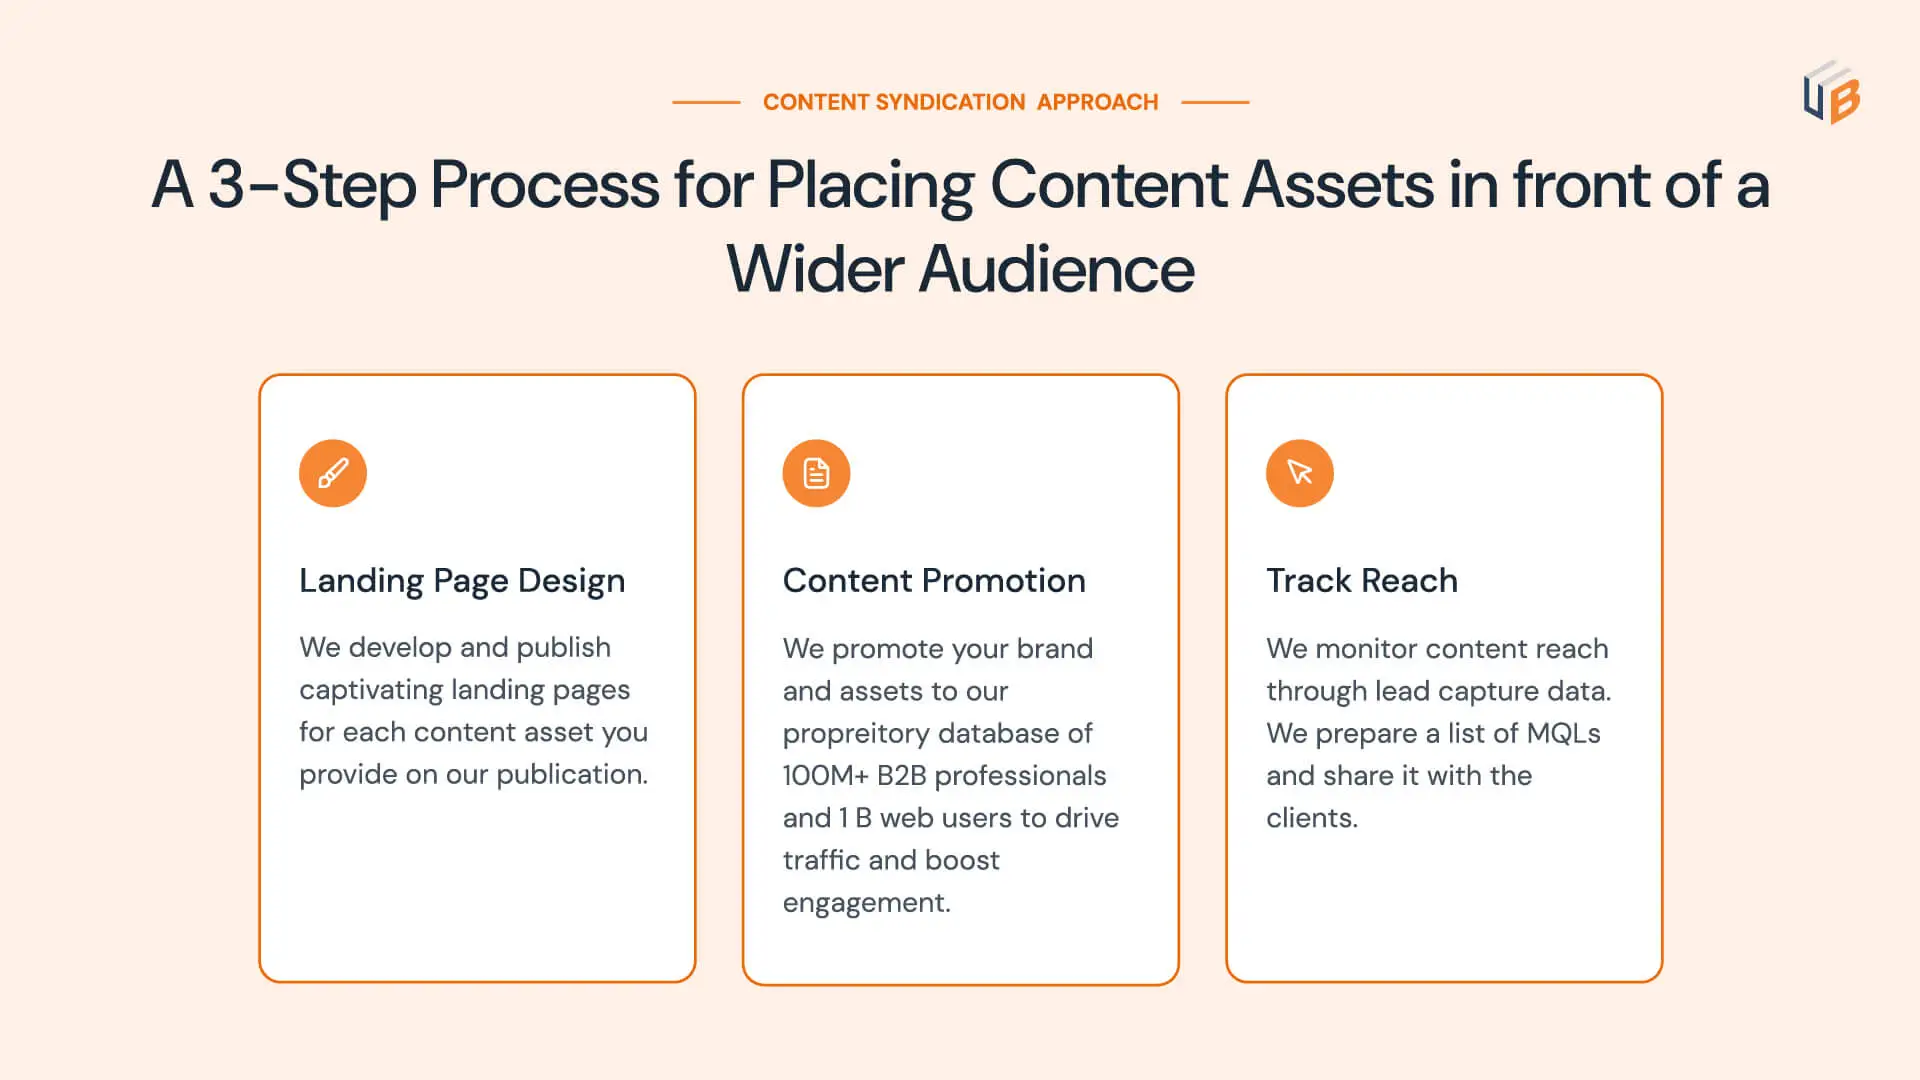 Process for placing content Assets in wider Audience